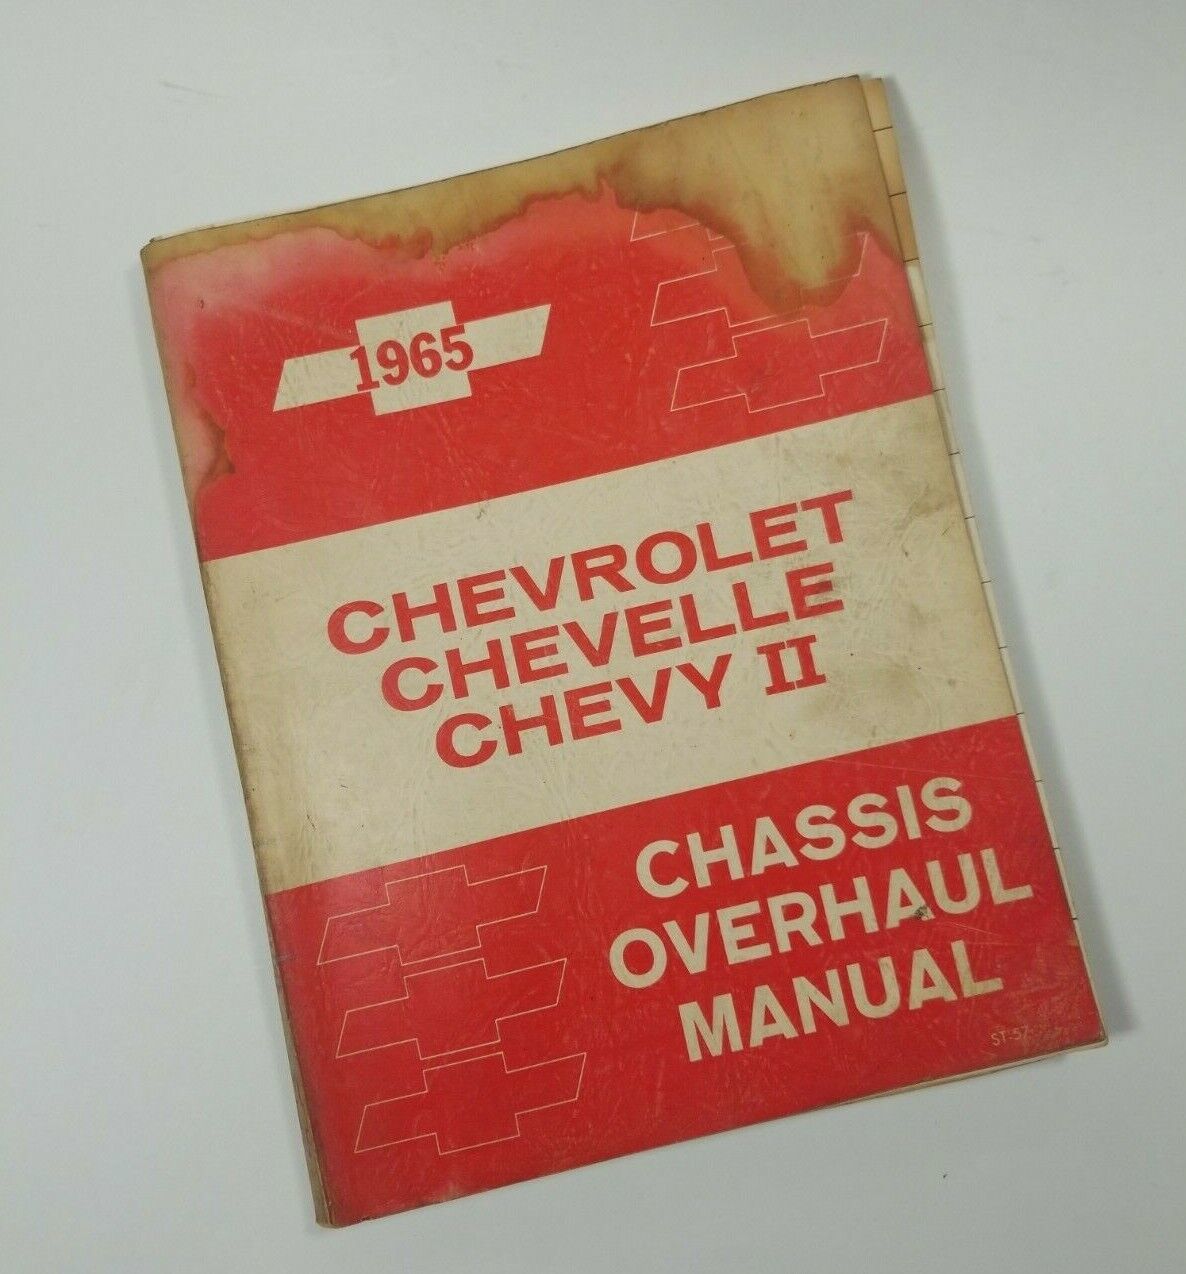 Primary image for 1965 Chevrolet Chevelle Chevy Chassis Overhaul Manual Car Repair